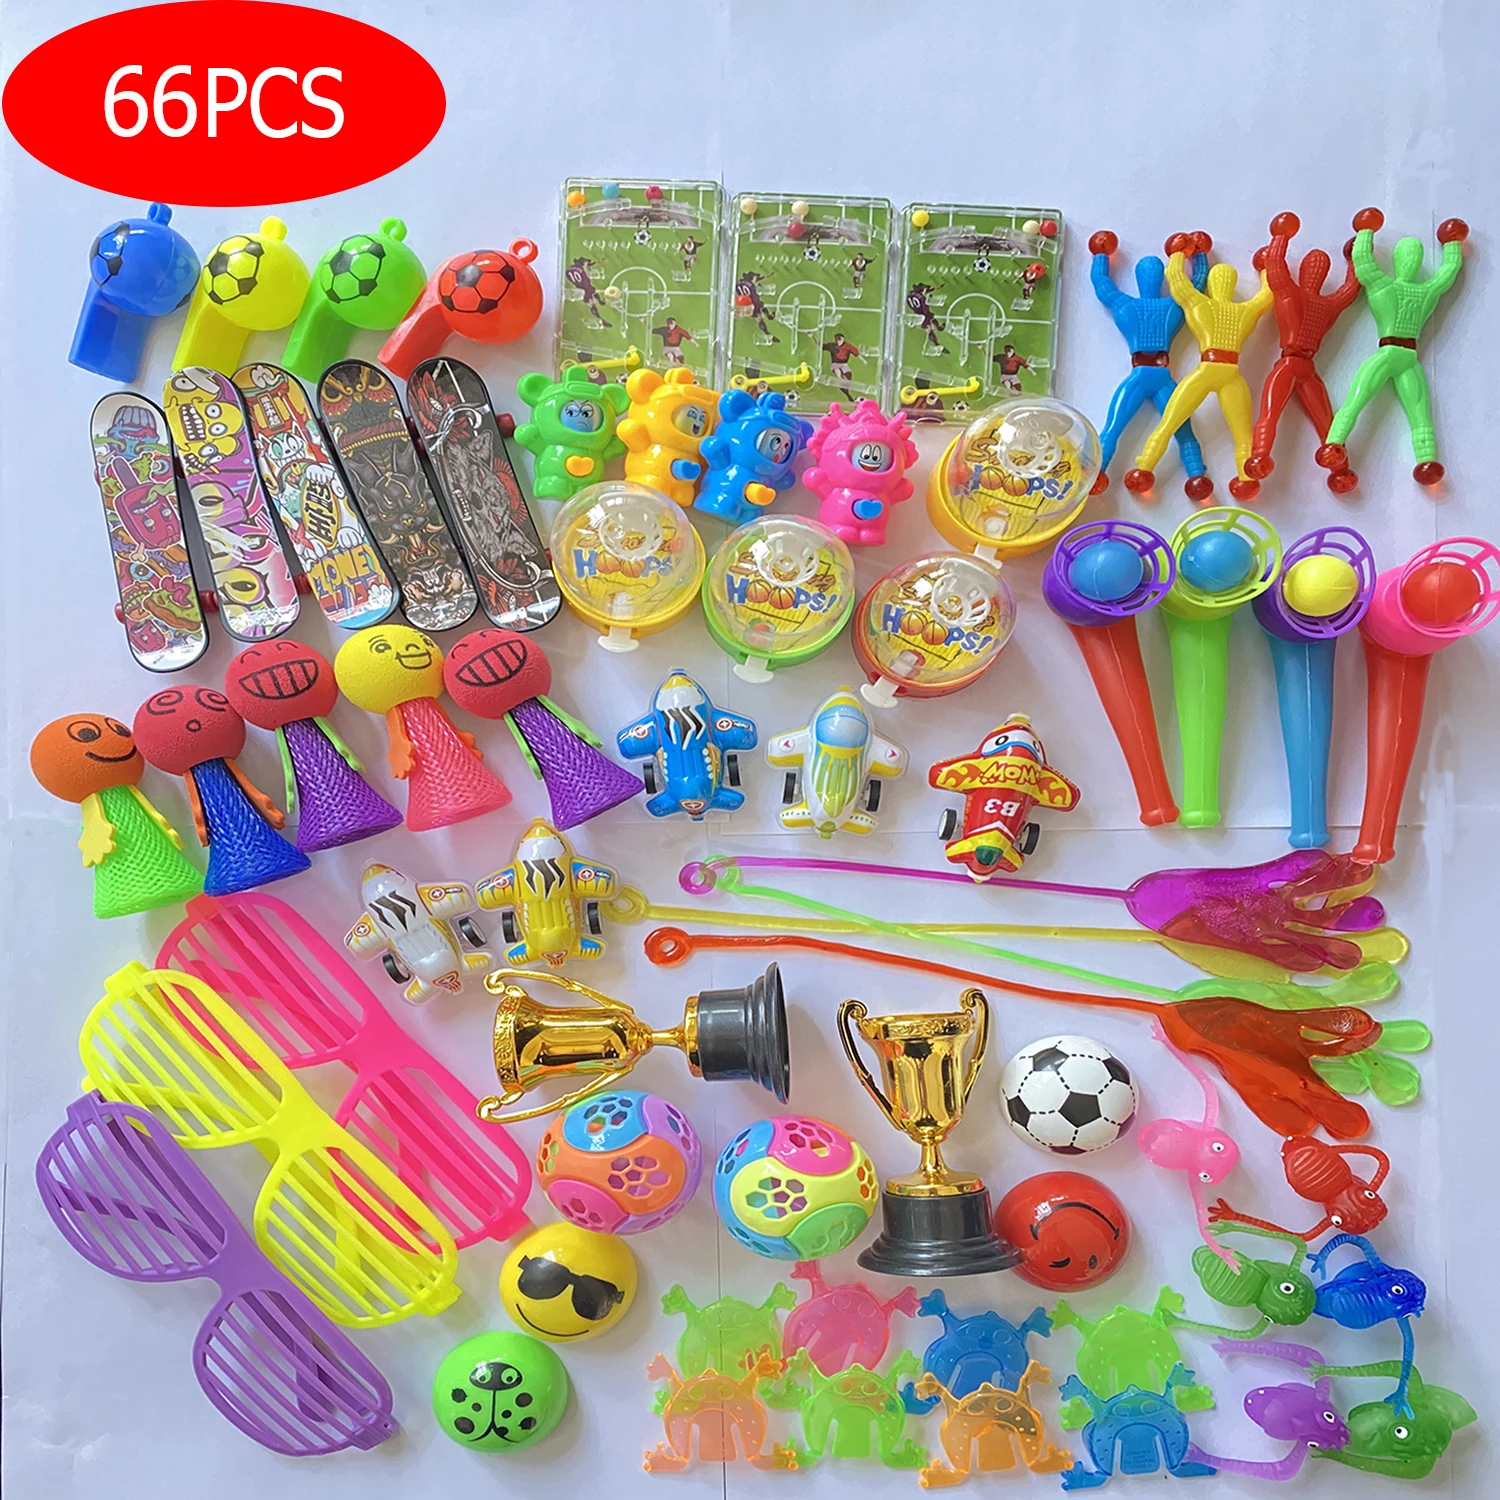 

66Pcs/Lot Party Favors Toy Assortment For Kids Carnival Prizes and School Classroom Rewards Pinata Filler Toys for Kids Birthday